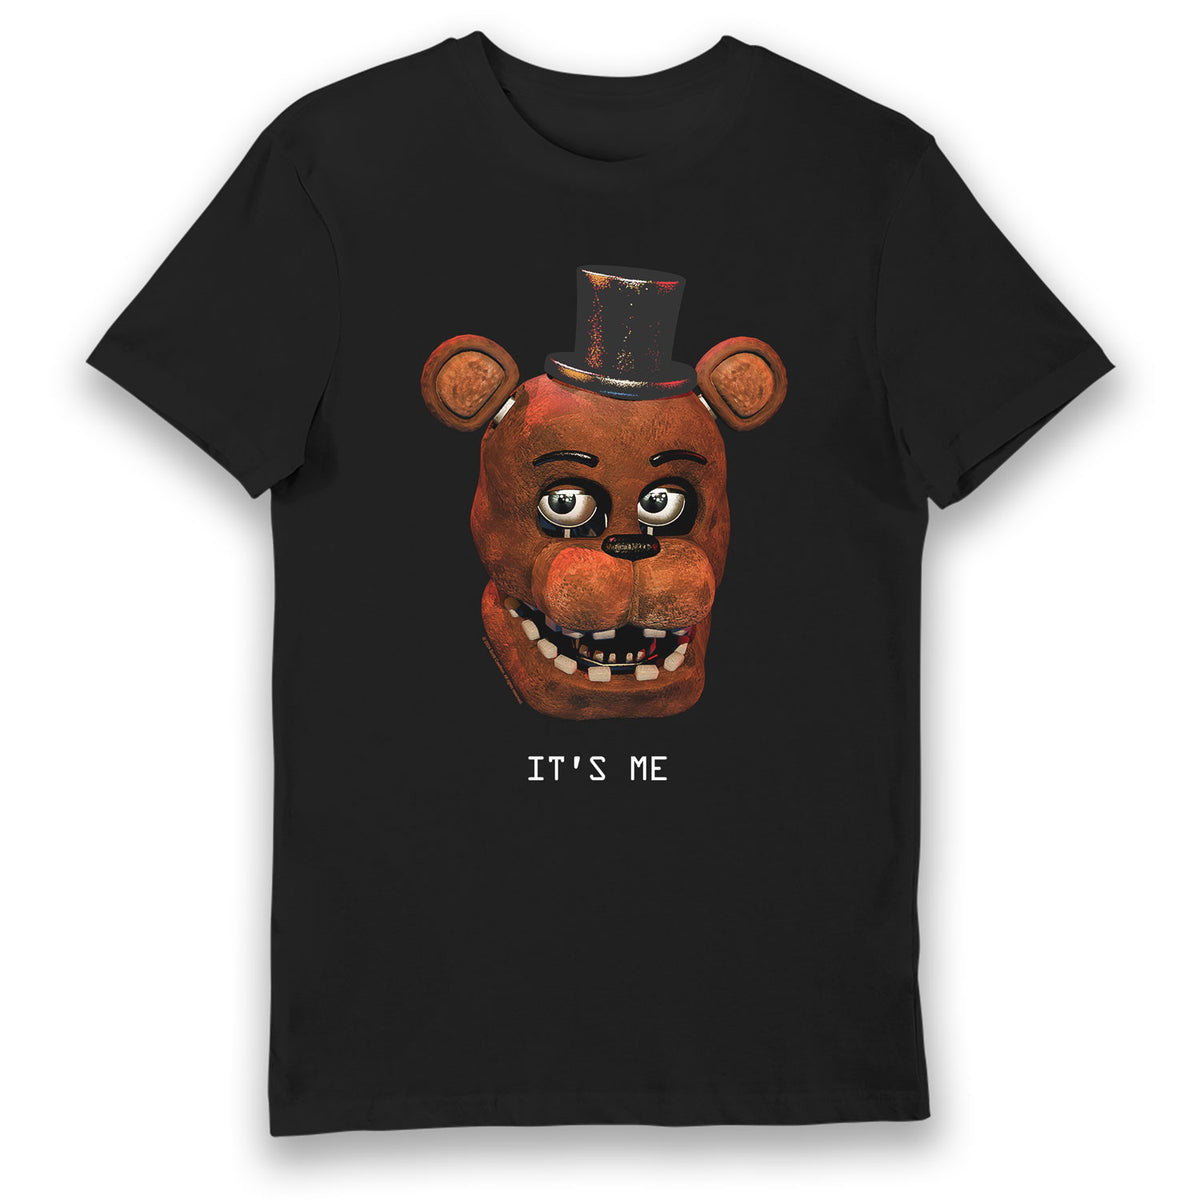 Five Nights At Freddys It's Me T-Shirt